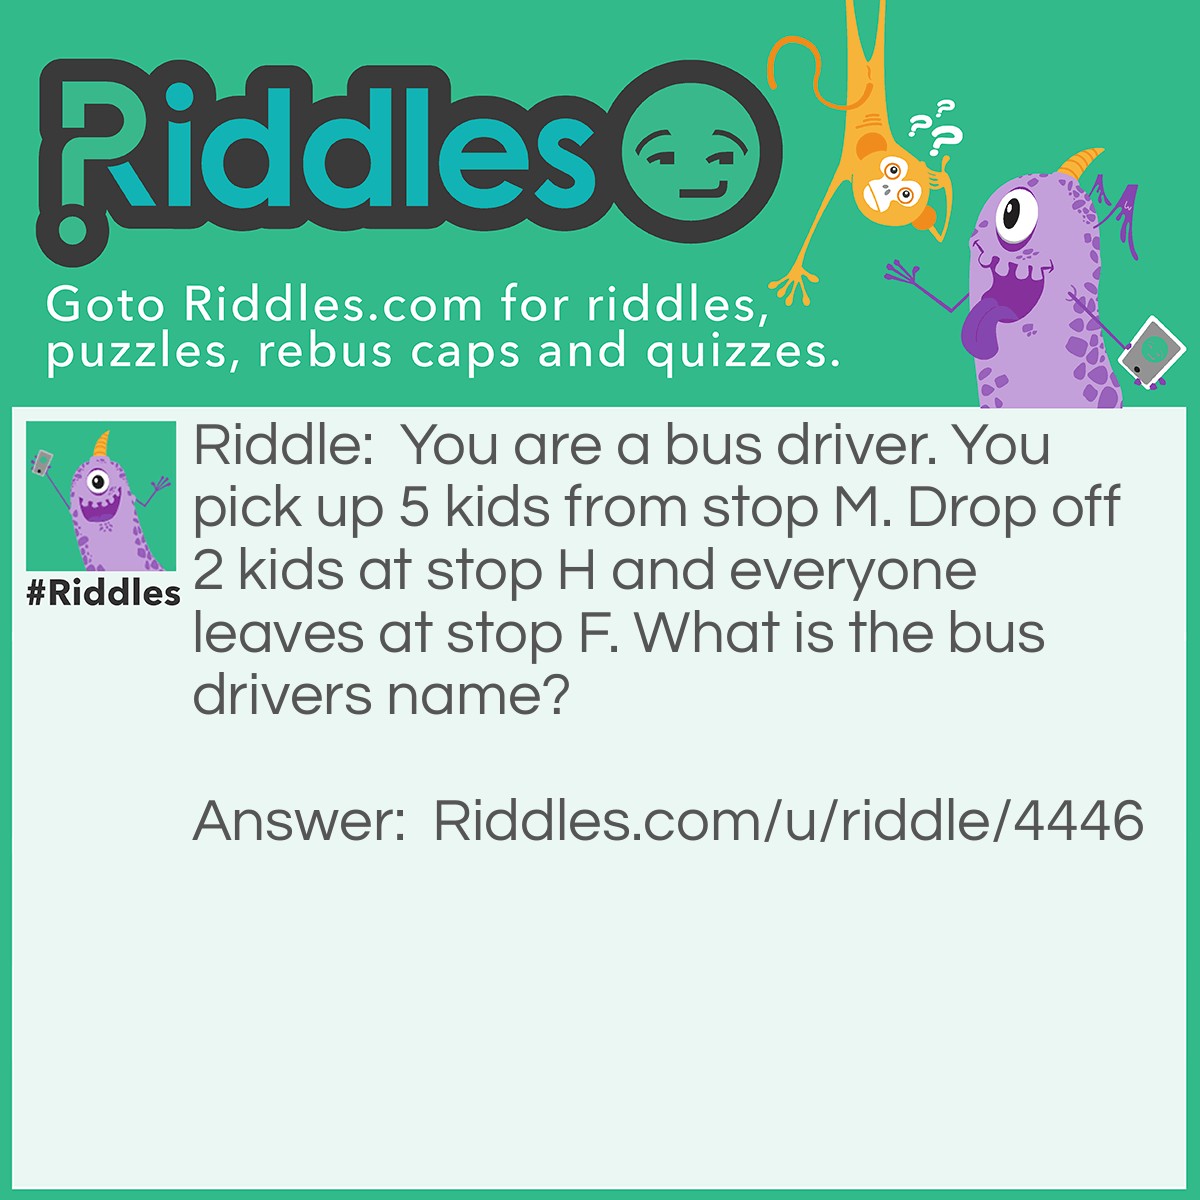 Riddle: You are a bus driver. You pick up 5 kids from stop M. Drop off 2 kids at stop H and everyone leaves at stop F. What is the bus drivers name? Answer: The name of the bus driver is your name because YOU are the bus driver! :)